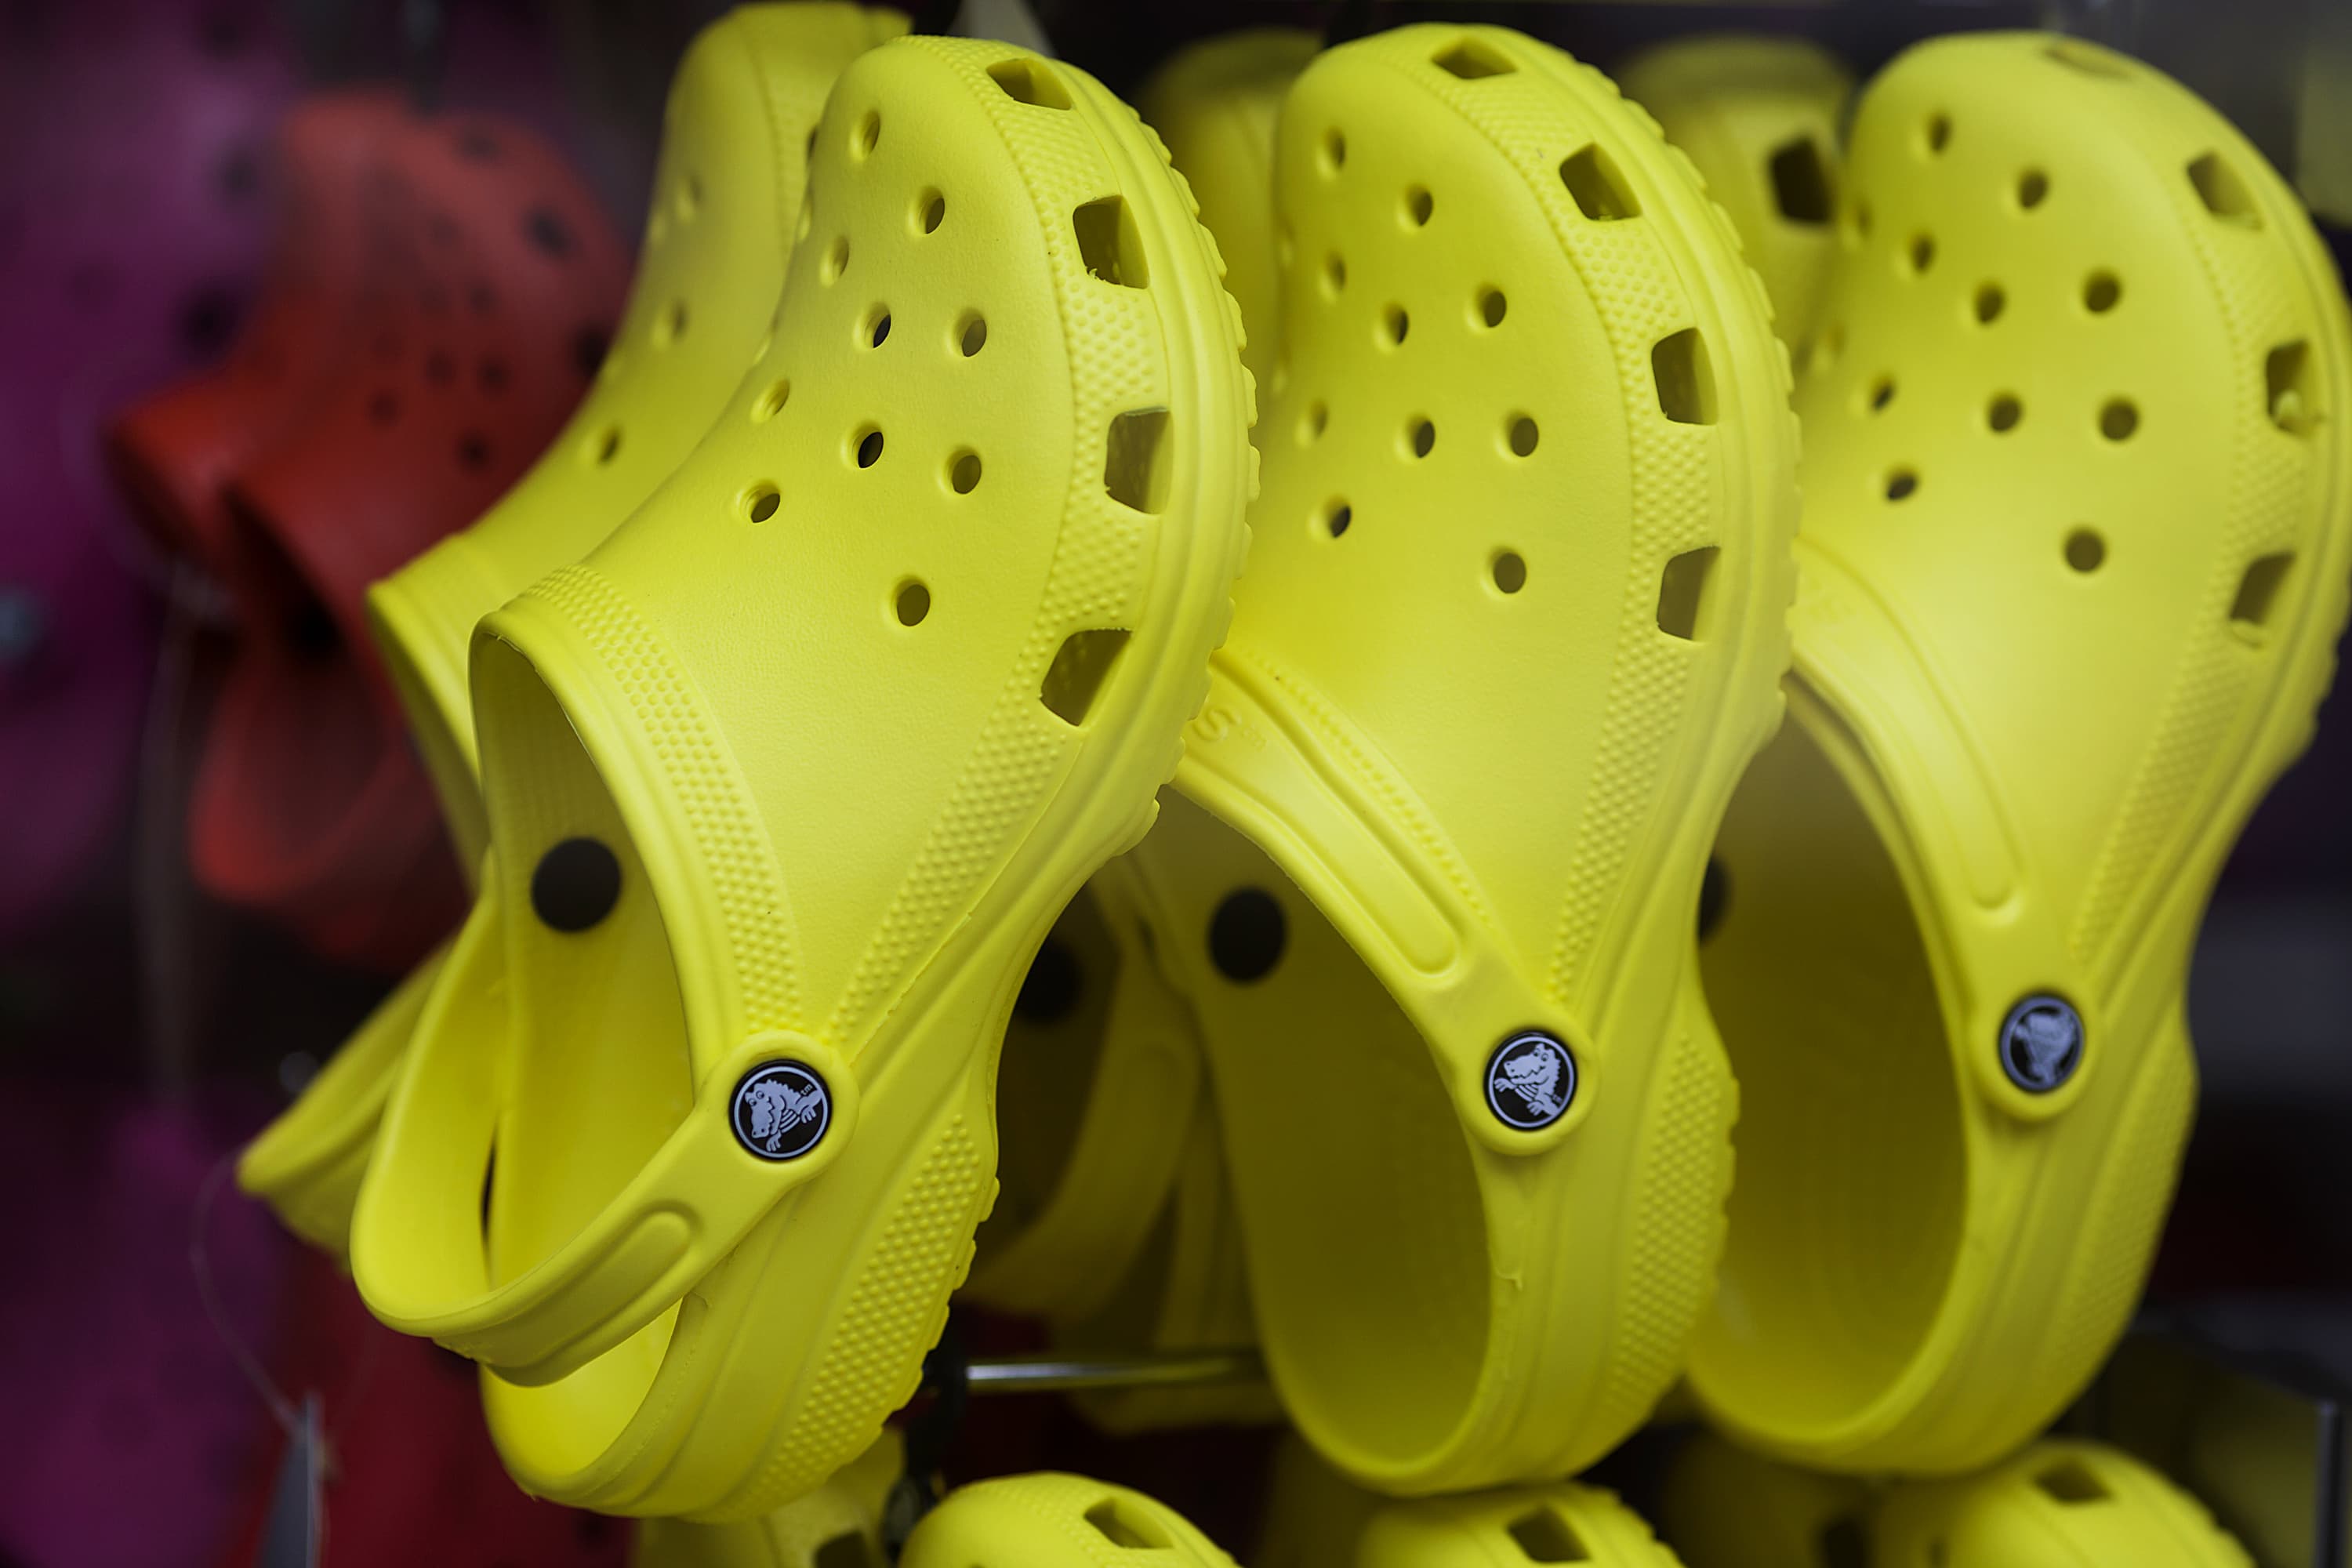 Crocs shares rise with increased selling prospects until 2021